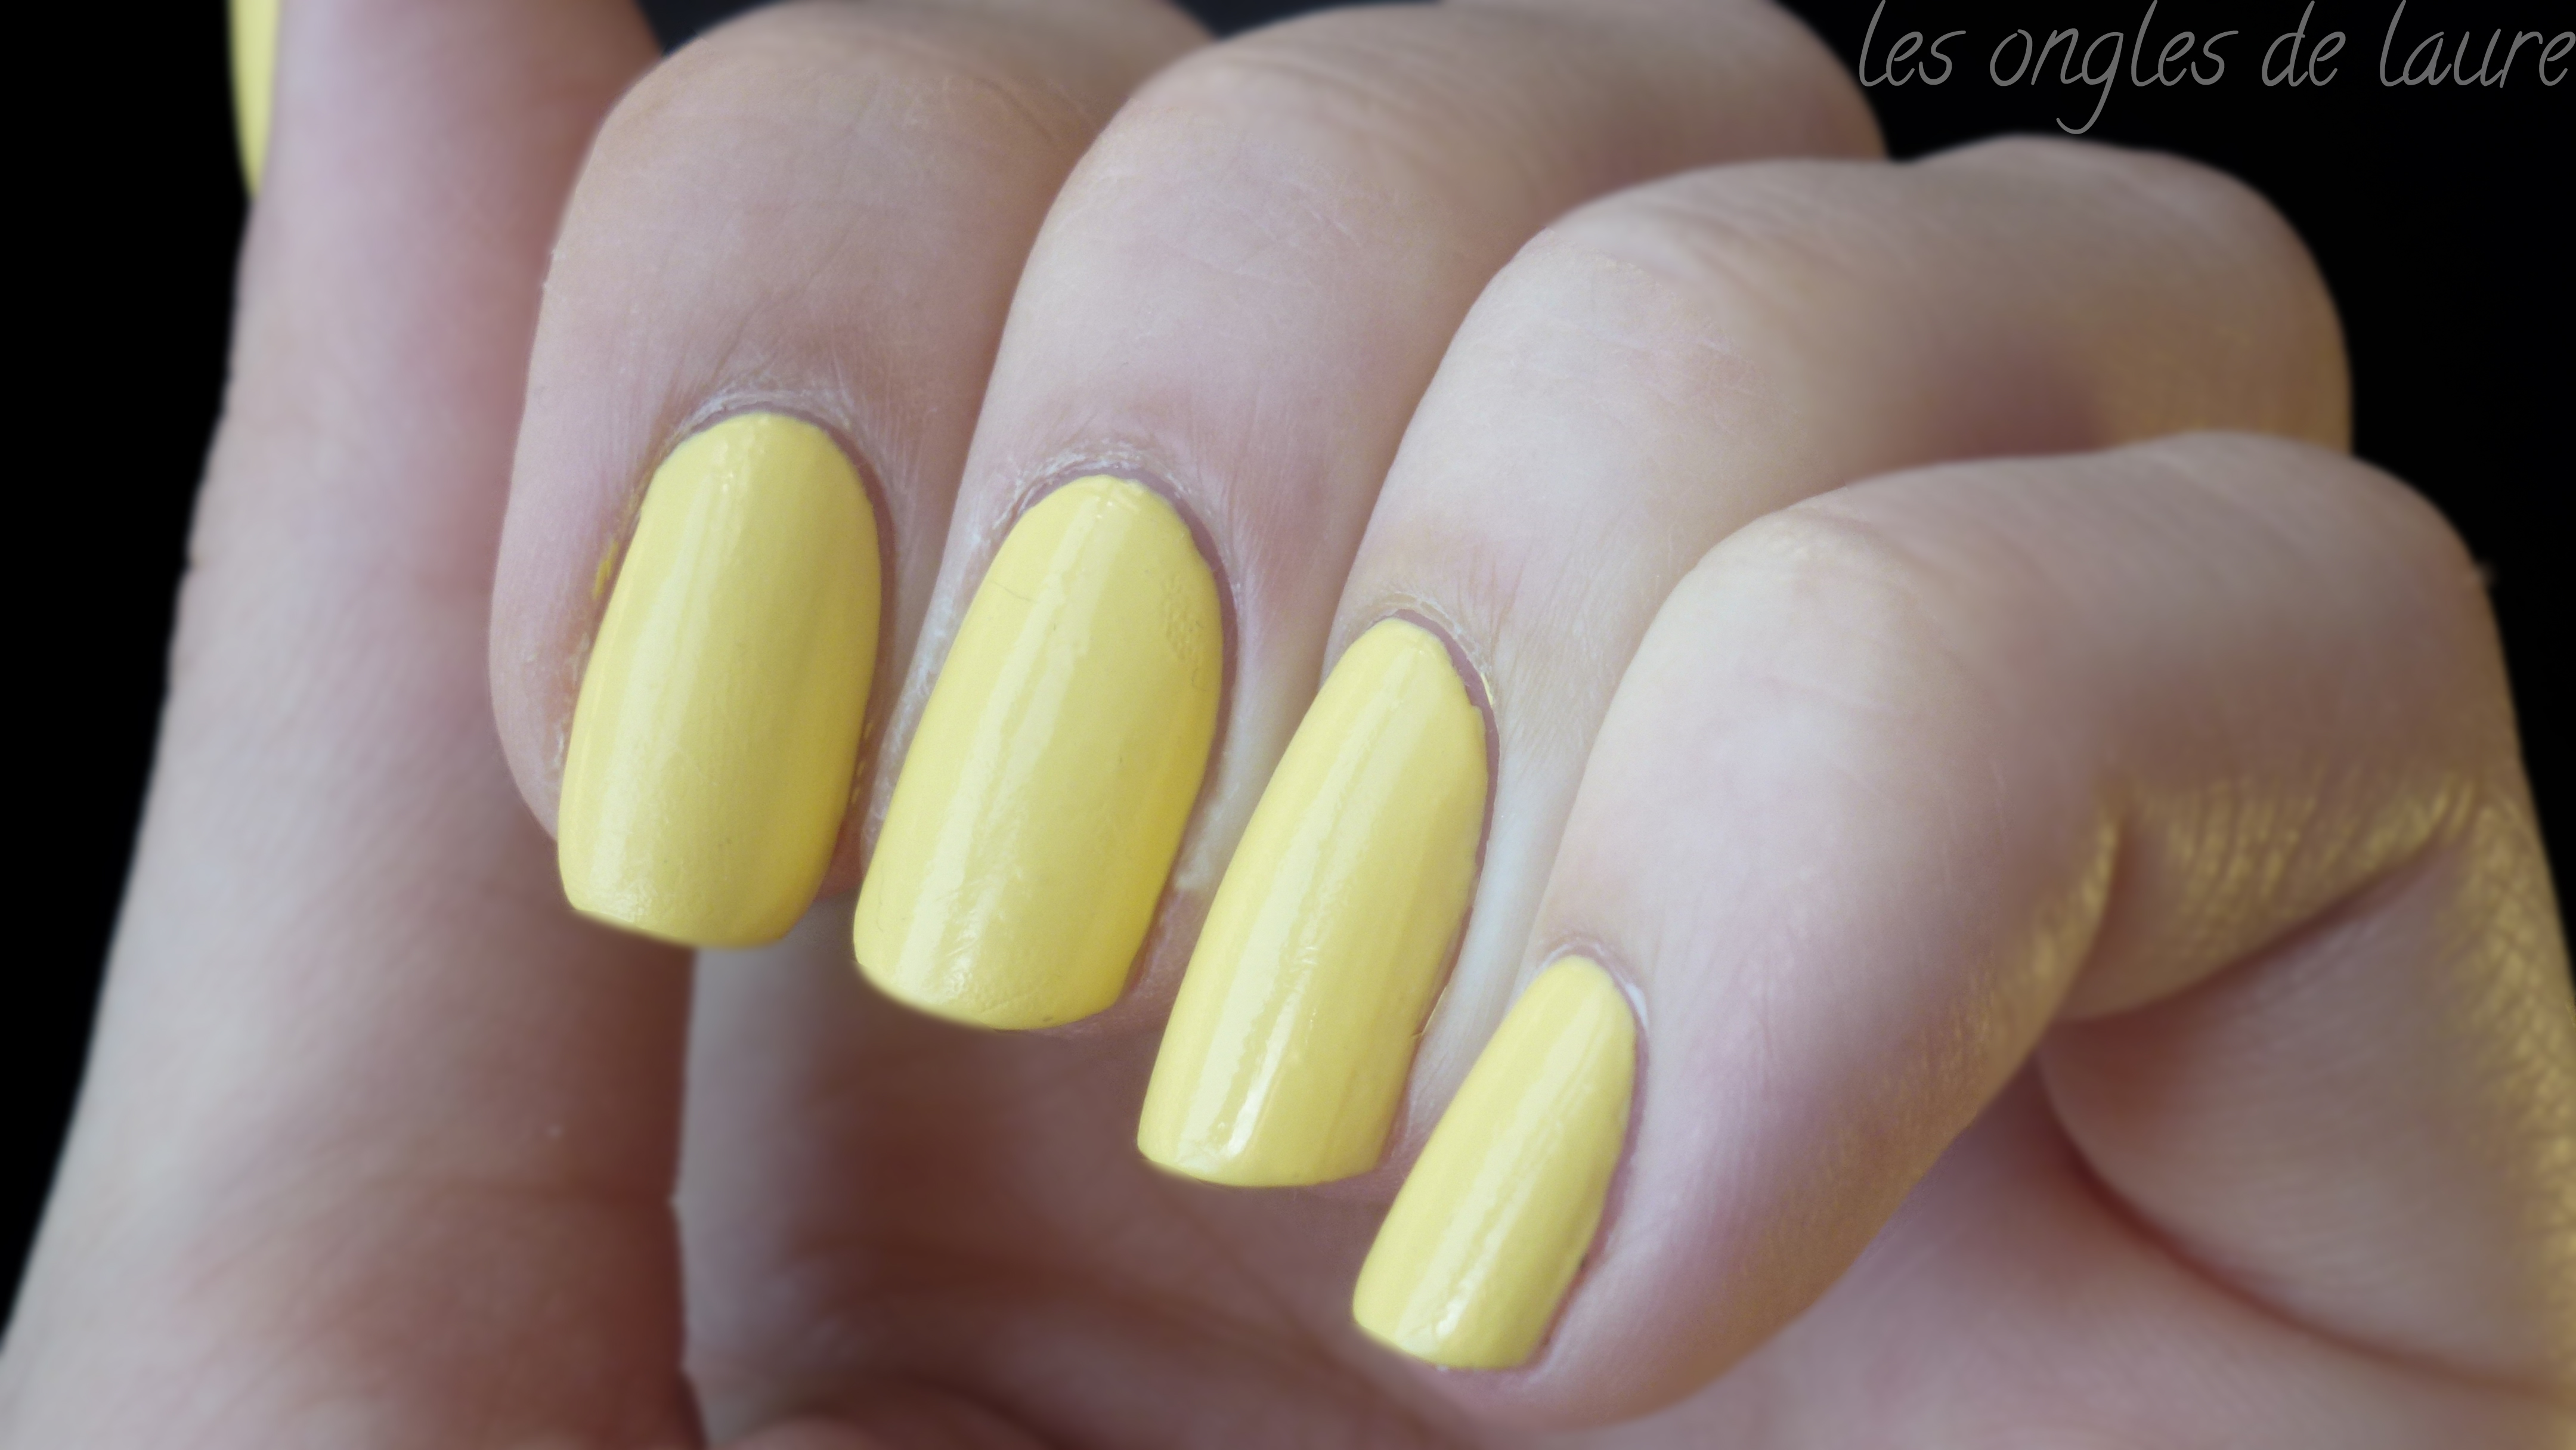 Swatch Essence - Love is in the air - Les ongles de Laure - Blog Nail Art